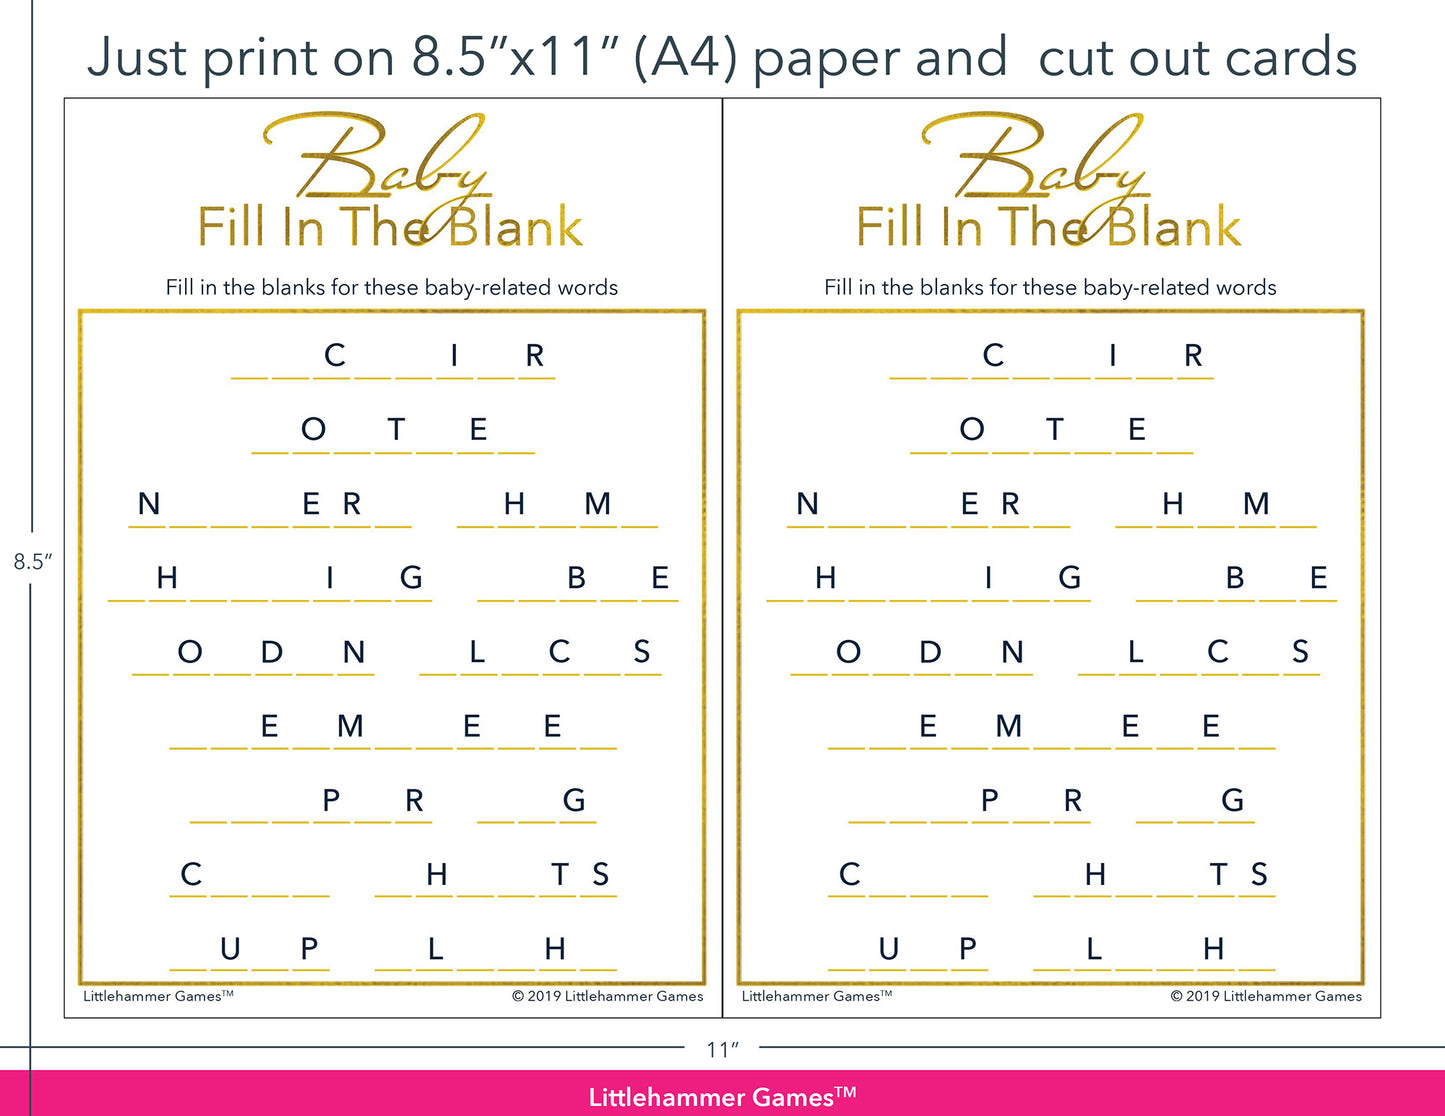 Baby Fill in the Blank gold game cards with printing instructions